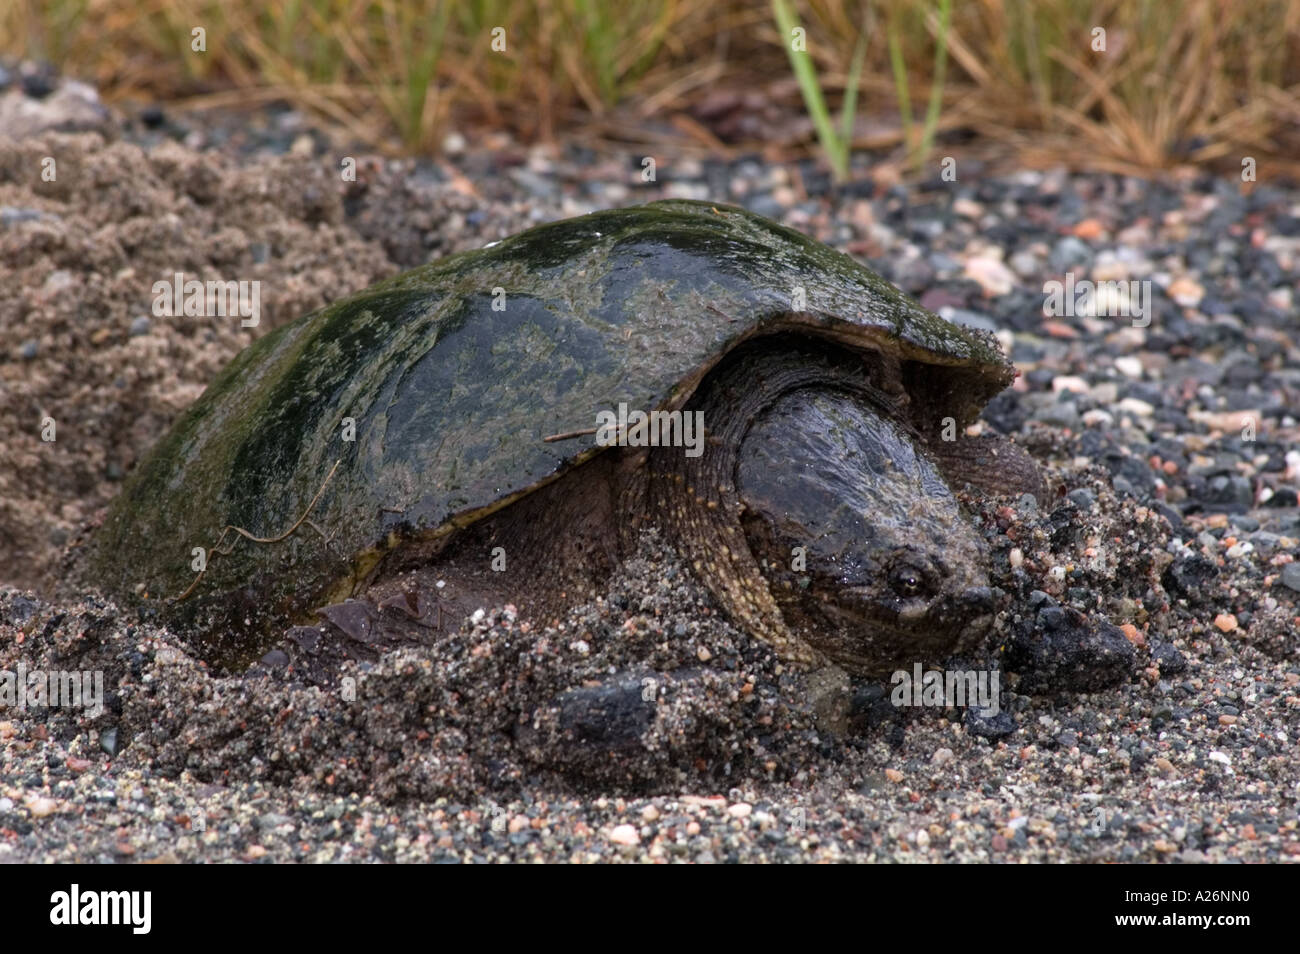 Snapping turtle (Chelydra serpentina) Female laying eggs in roadside gravel Ontario, Canada, Canada Stock Photo